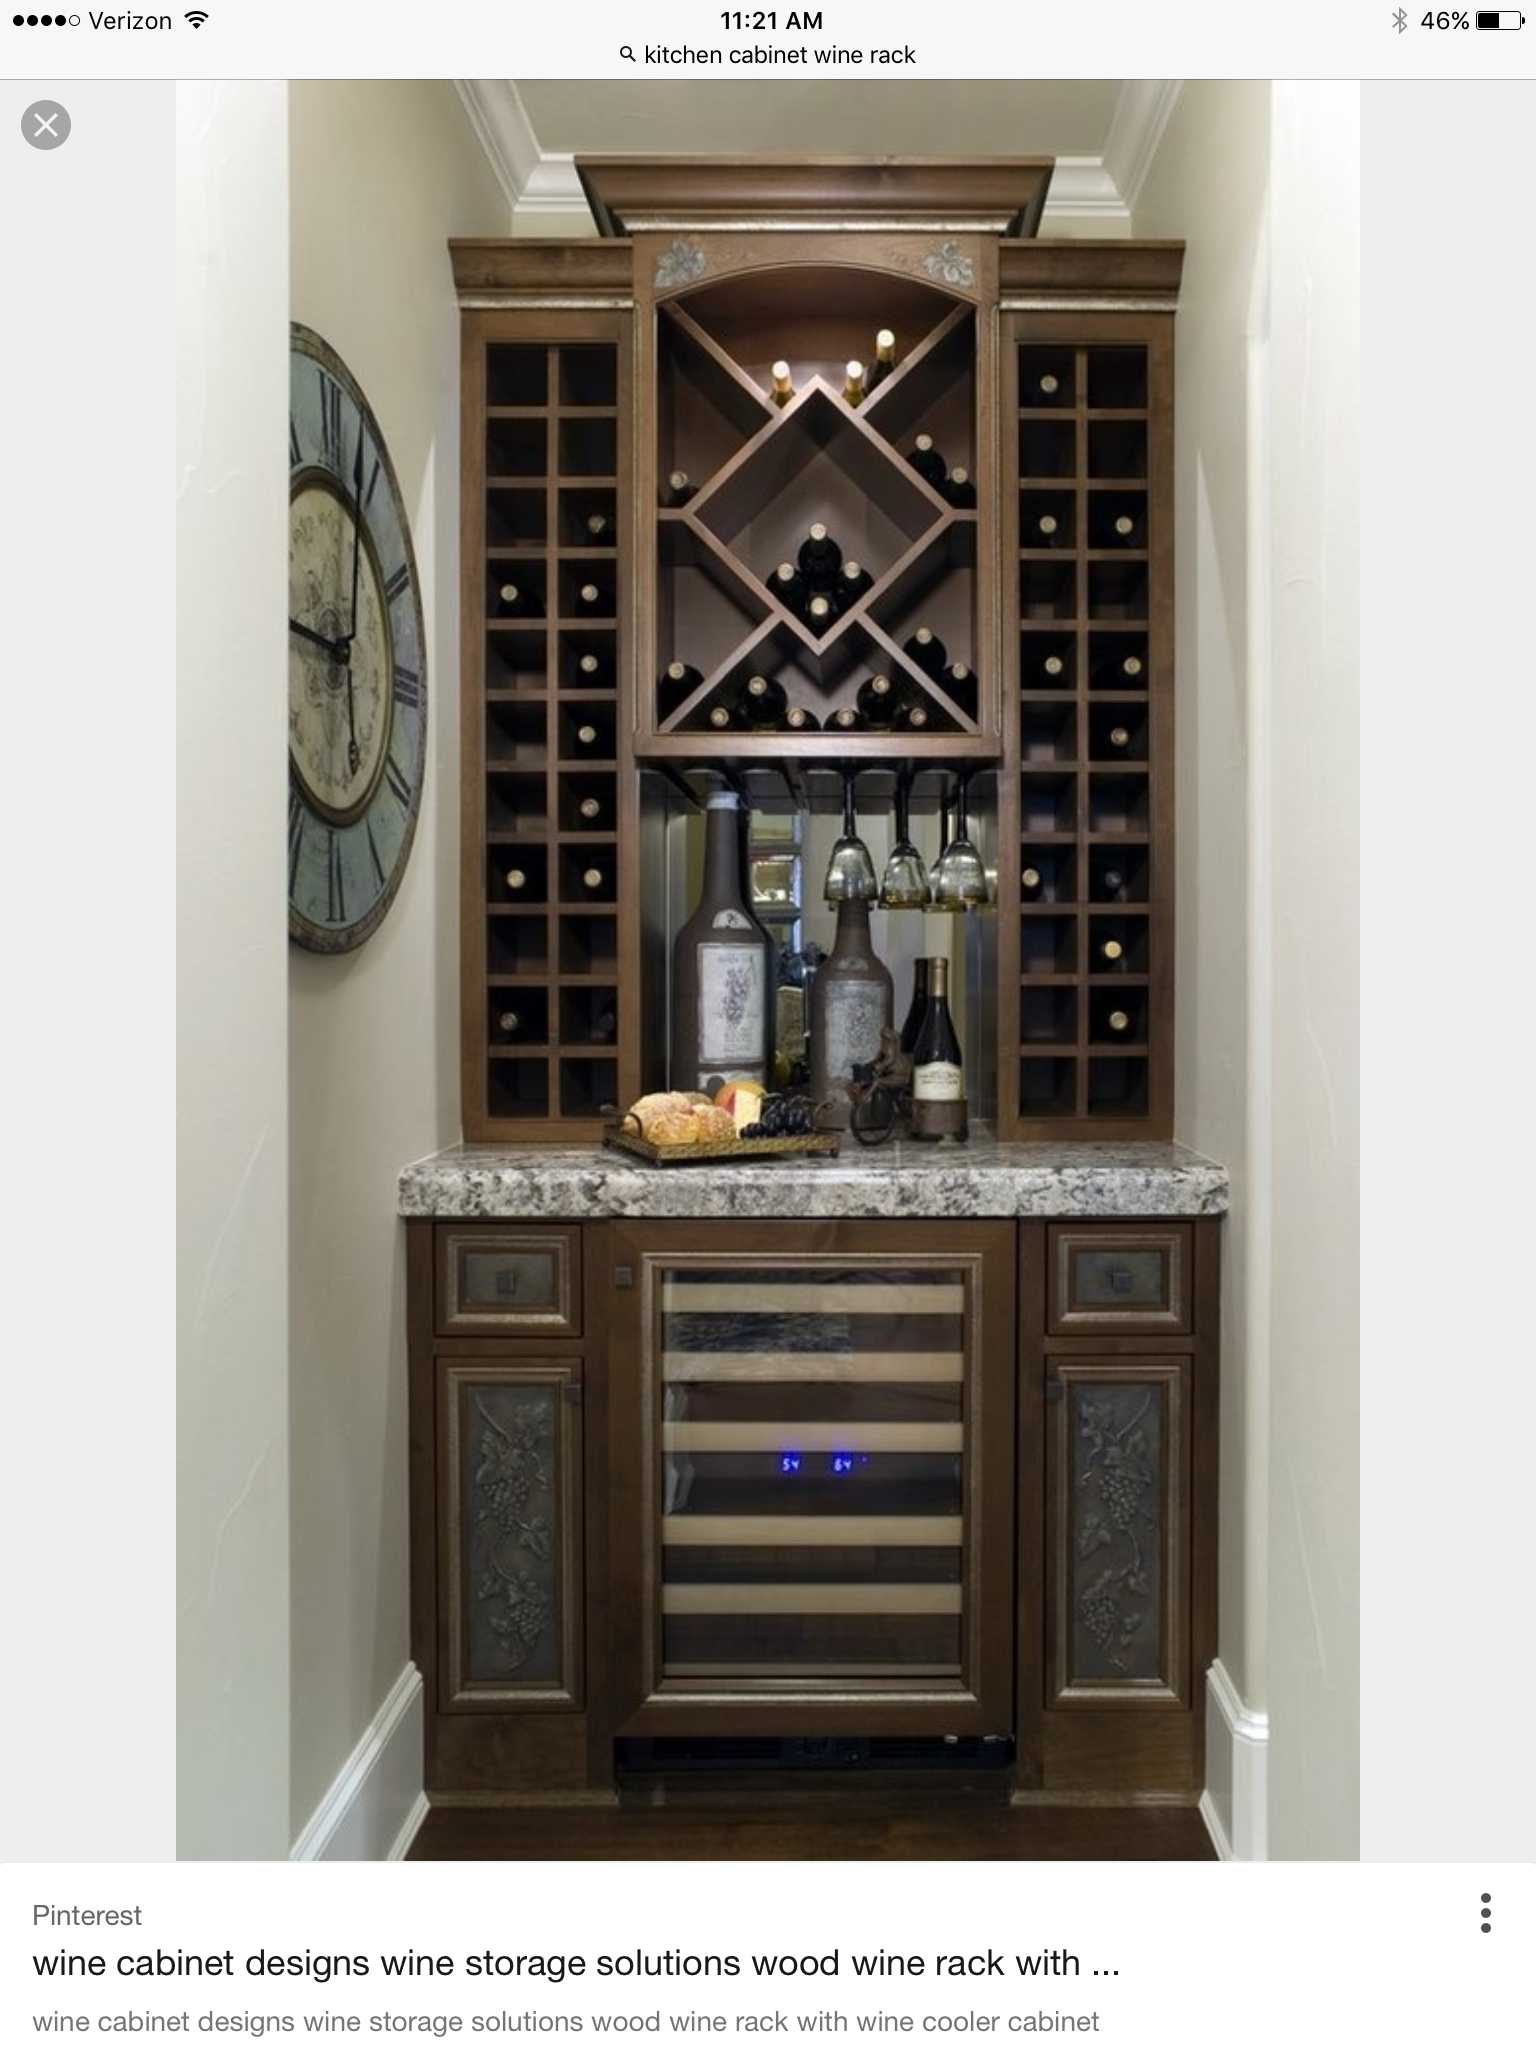 Pin Aj On Ideas For The House In 2019 Wine Cabinets throughout sizing 1536 X 2048